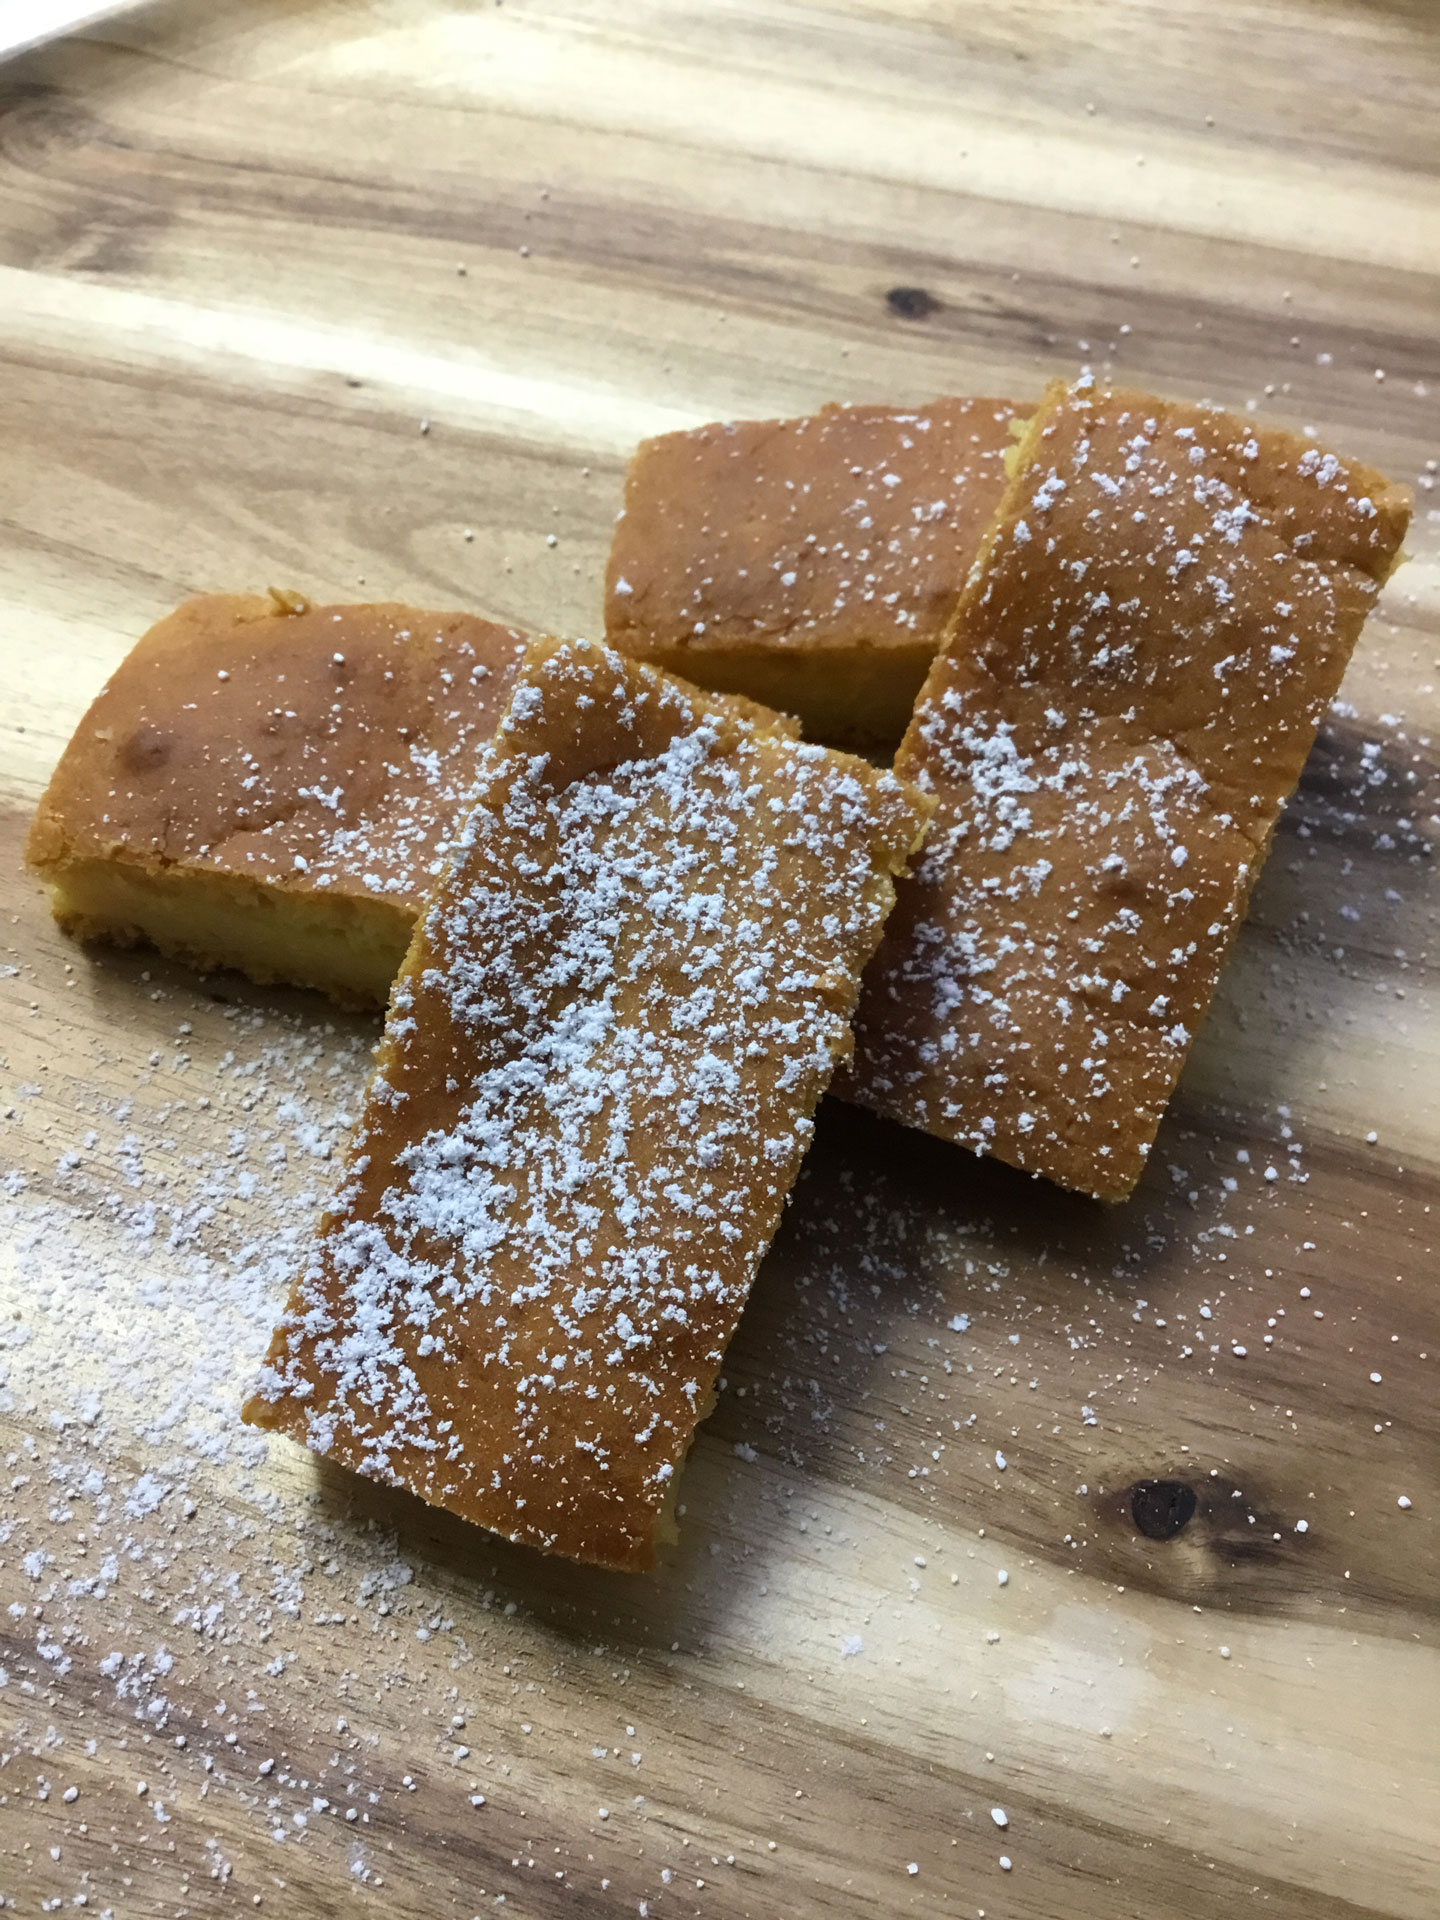 Four pieces of slice, dusted with icing sugar and arranged neatly on a board